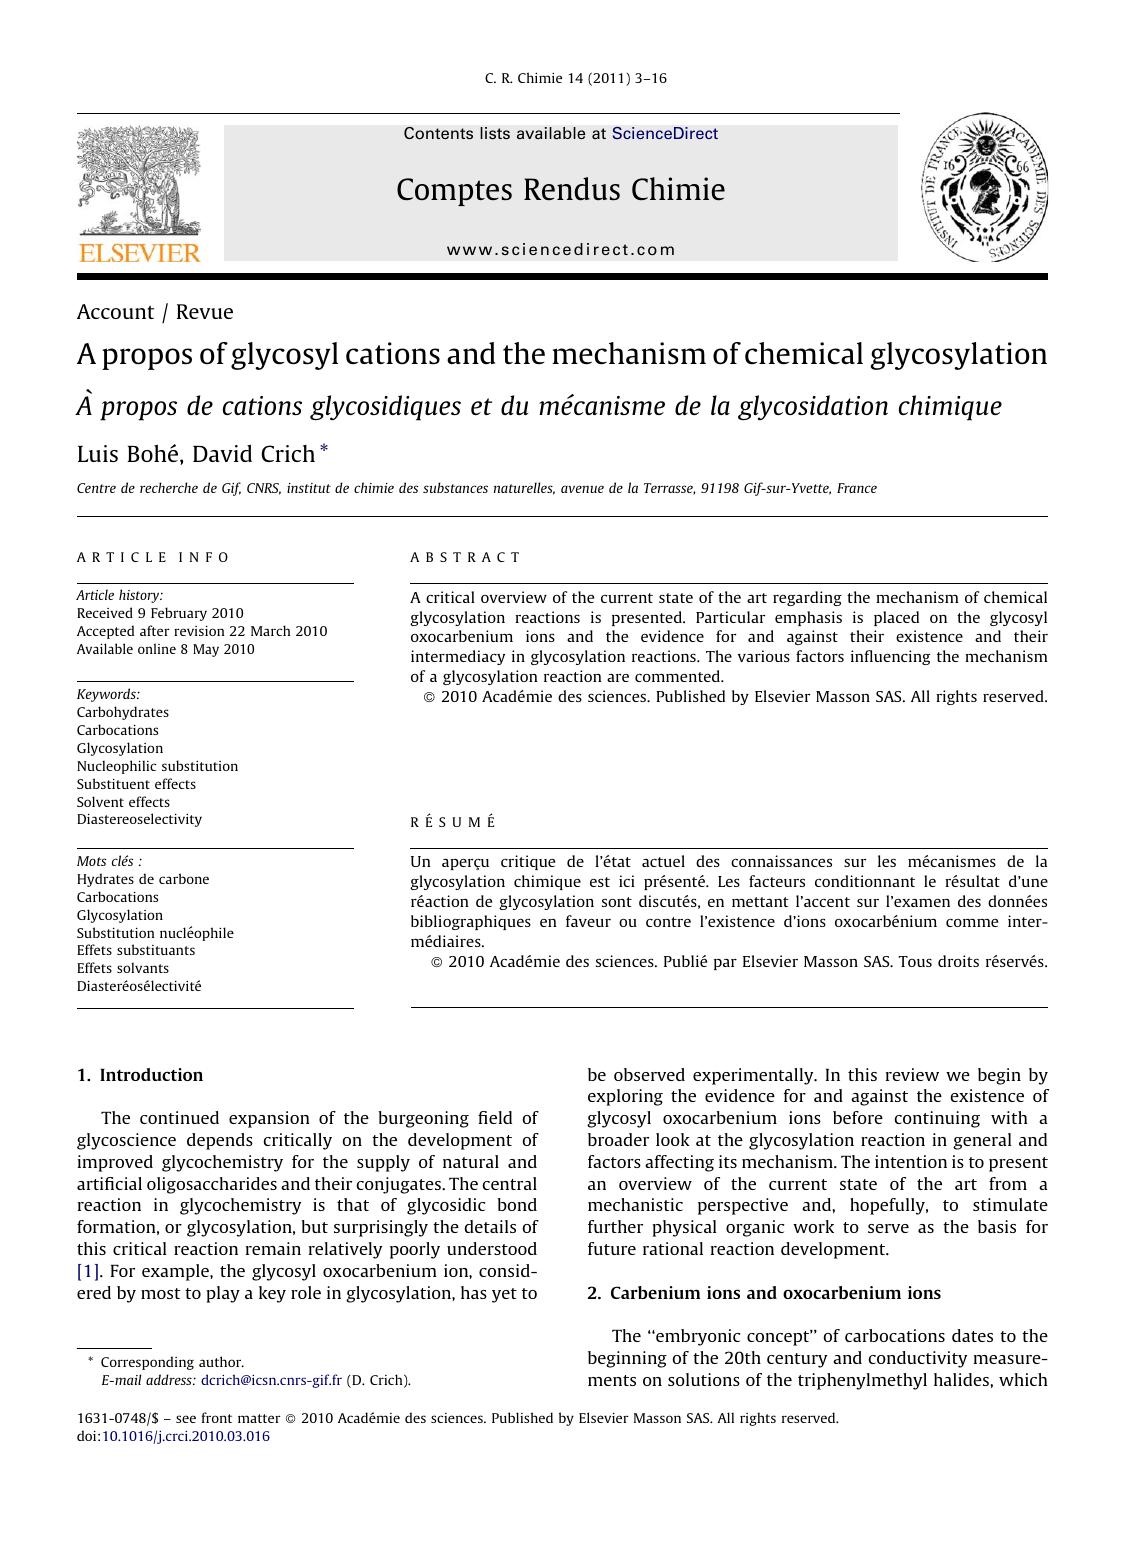 A propos of glycosyl cations and the mechanism of chemical glycosylation by Luis BohÃ©